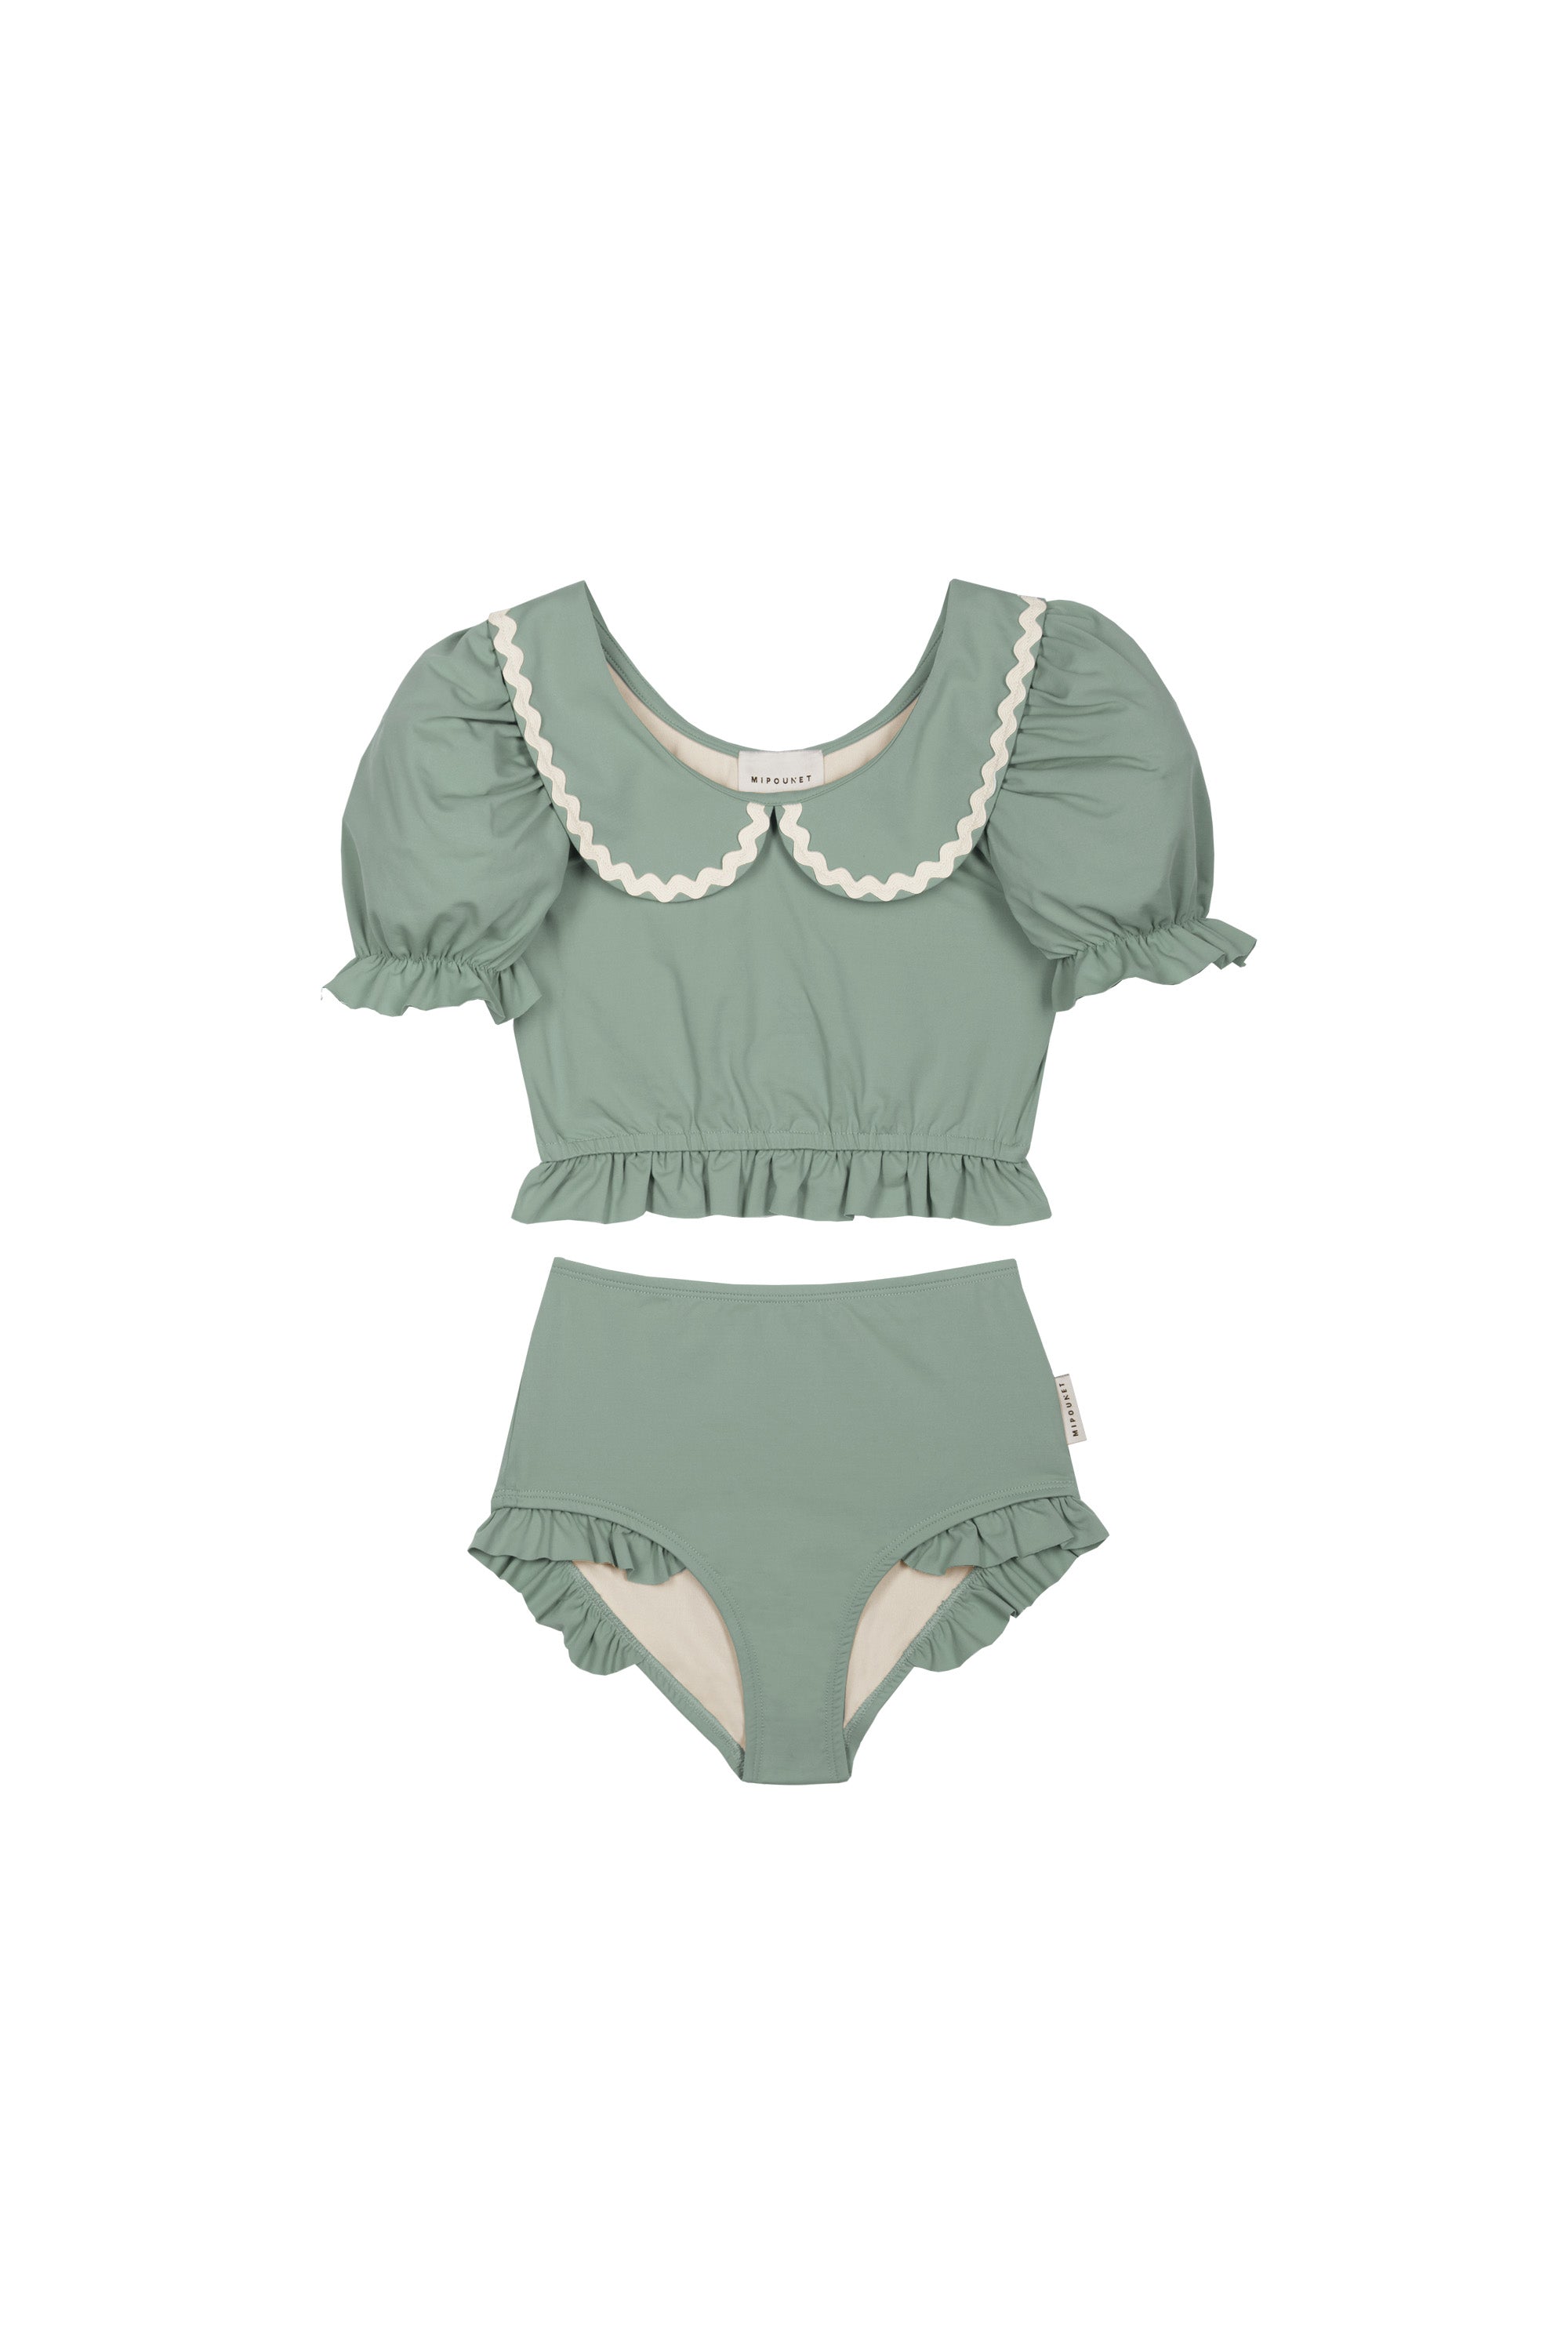 Mipounet - catalina collared swimsuit - musgo green